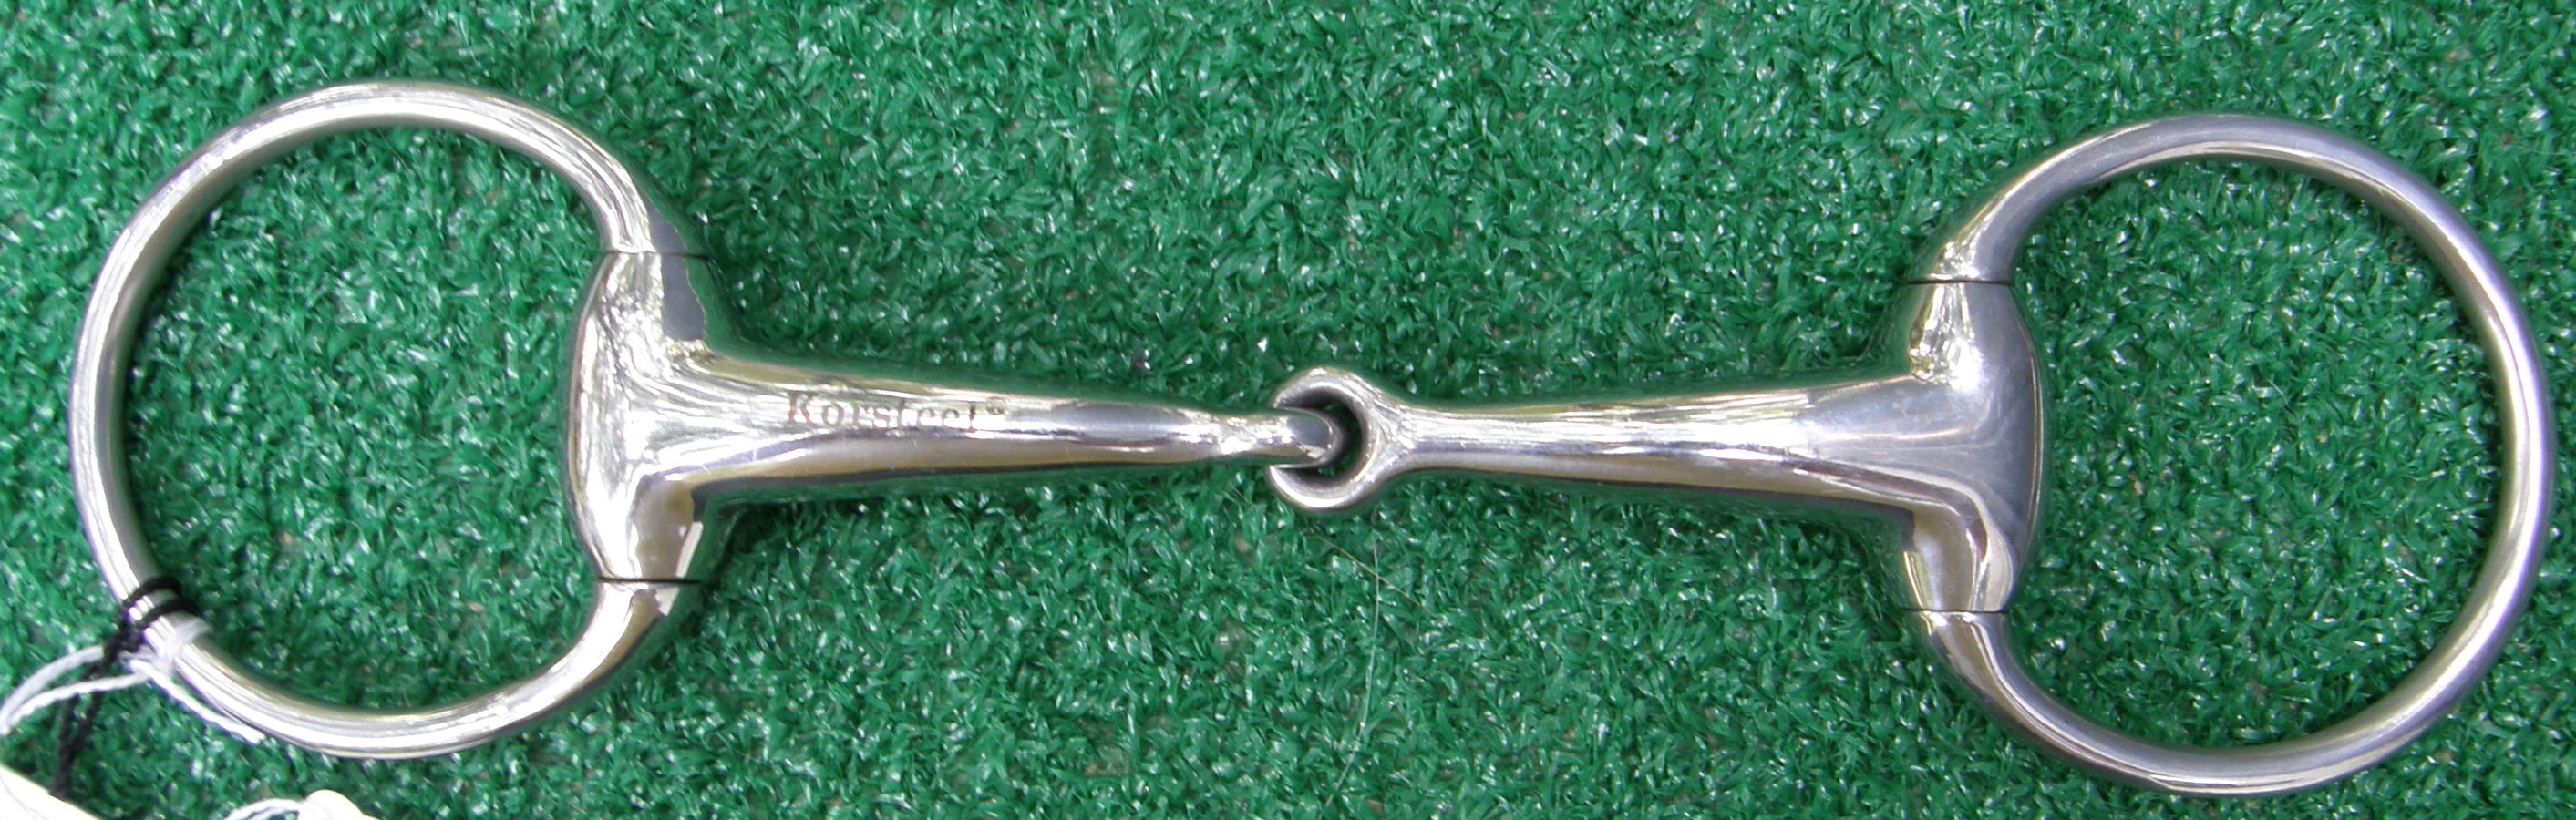 Korsteel 5” Thick Mouth Hollow Mouth Eggbutt Snaffle Bit